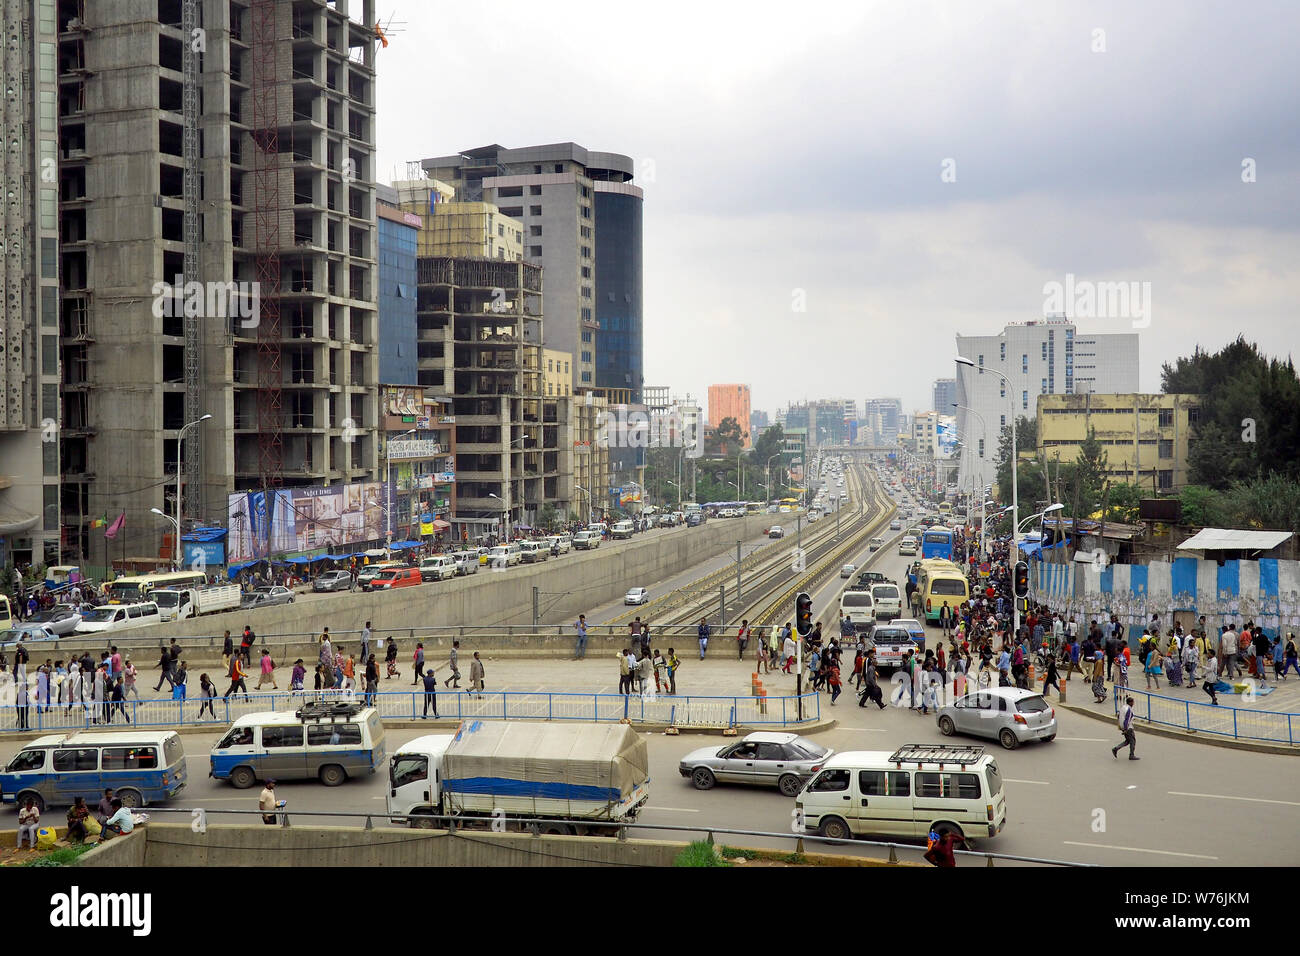 Addis Ababa, Ethiopia, 18 July 2019 : The vast city of Addis Ababa, capital of Ethiopia is one of the fastest growing cities on the African continent. Stock Photo